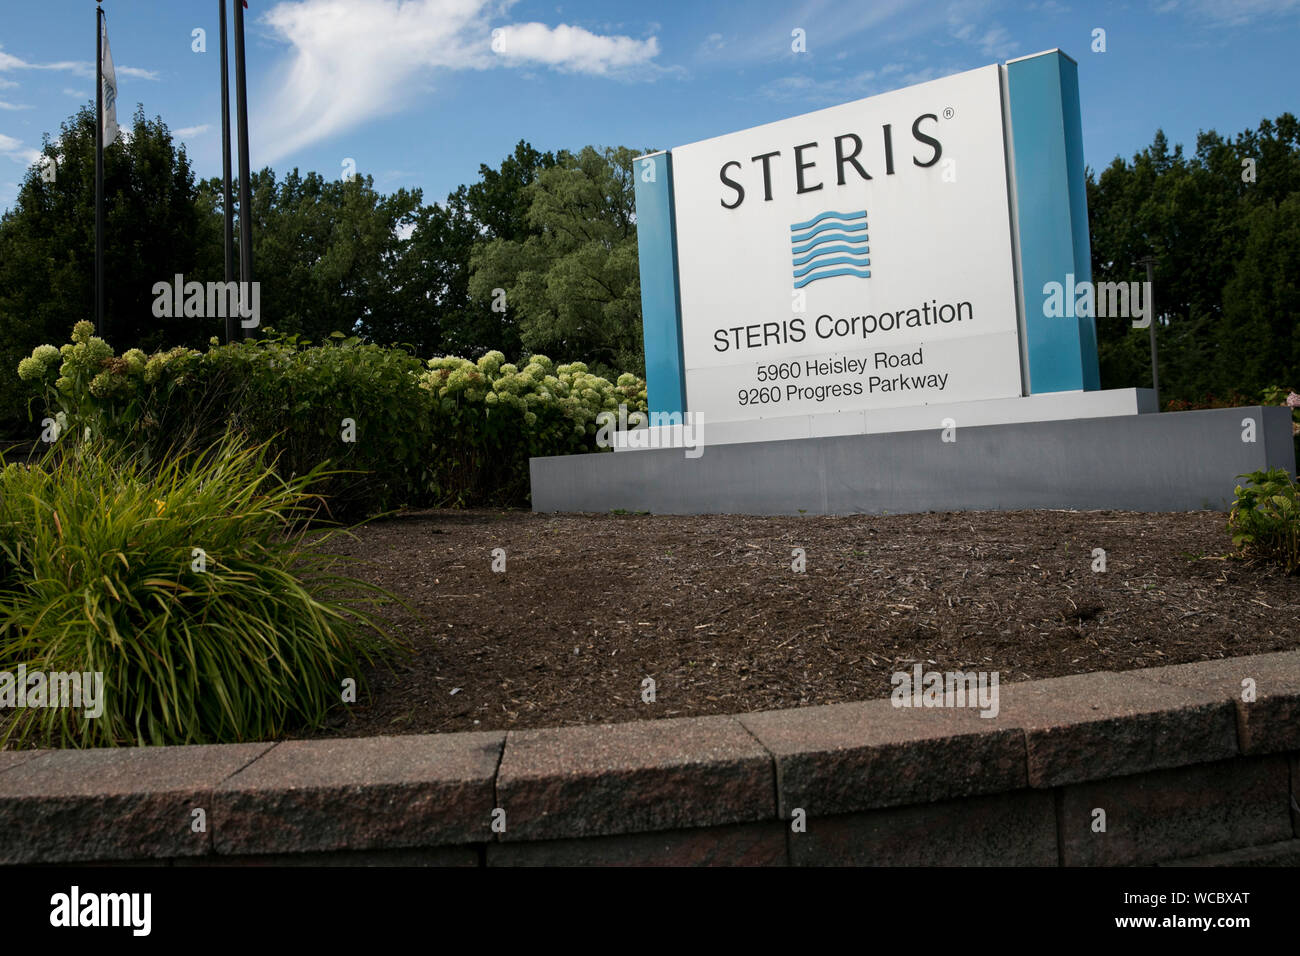 A logo sign outside of a occupied by the Steris Corporation in Mentor, Ohio on August 11, 2019 Stock Photo - Alamy